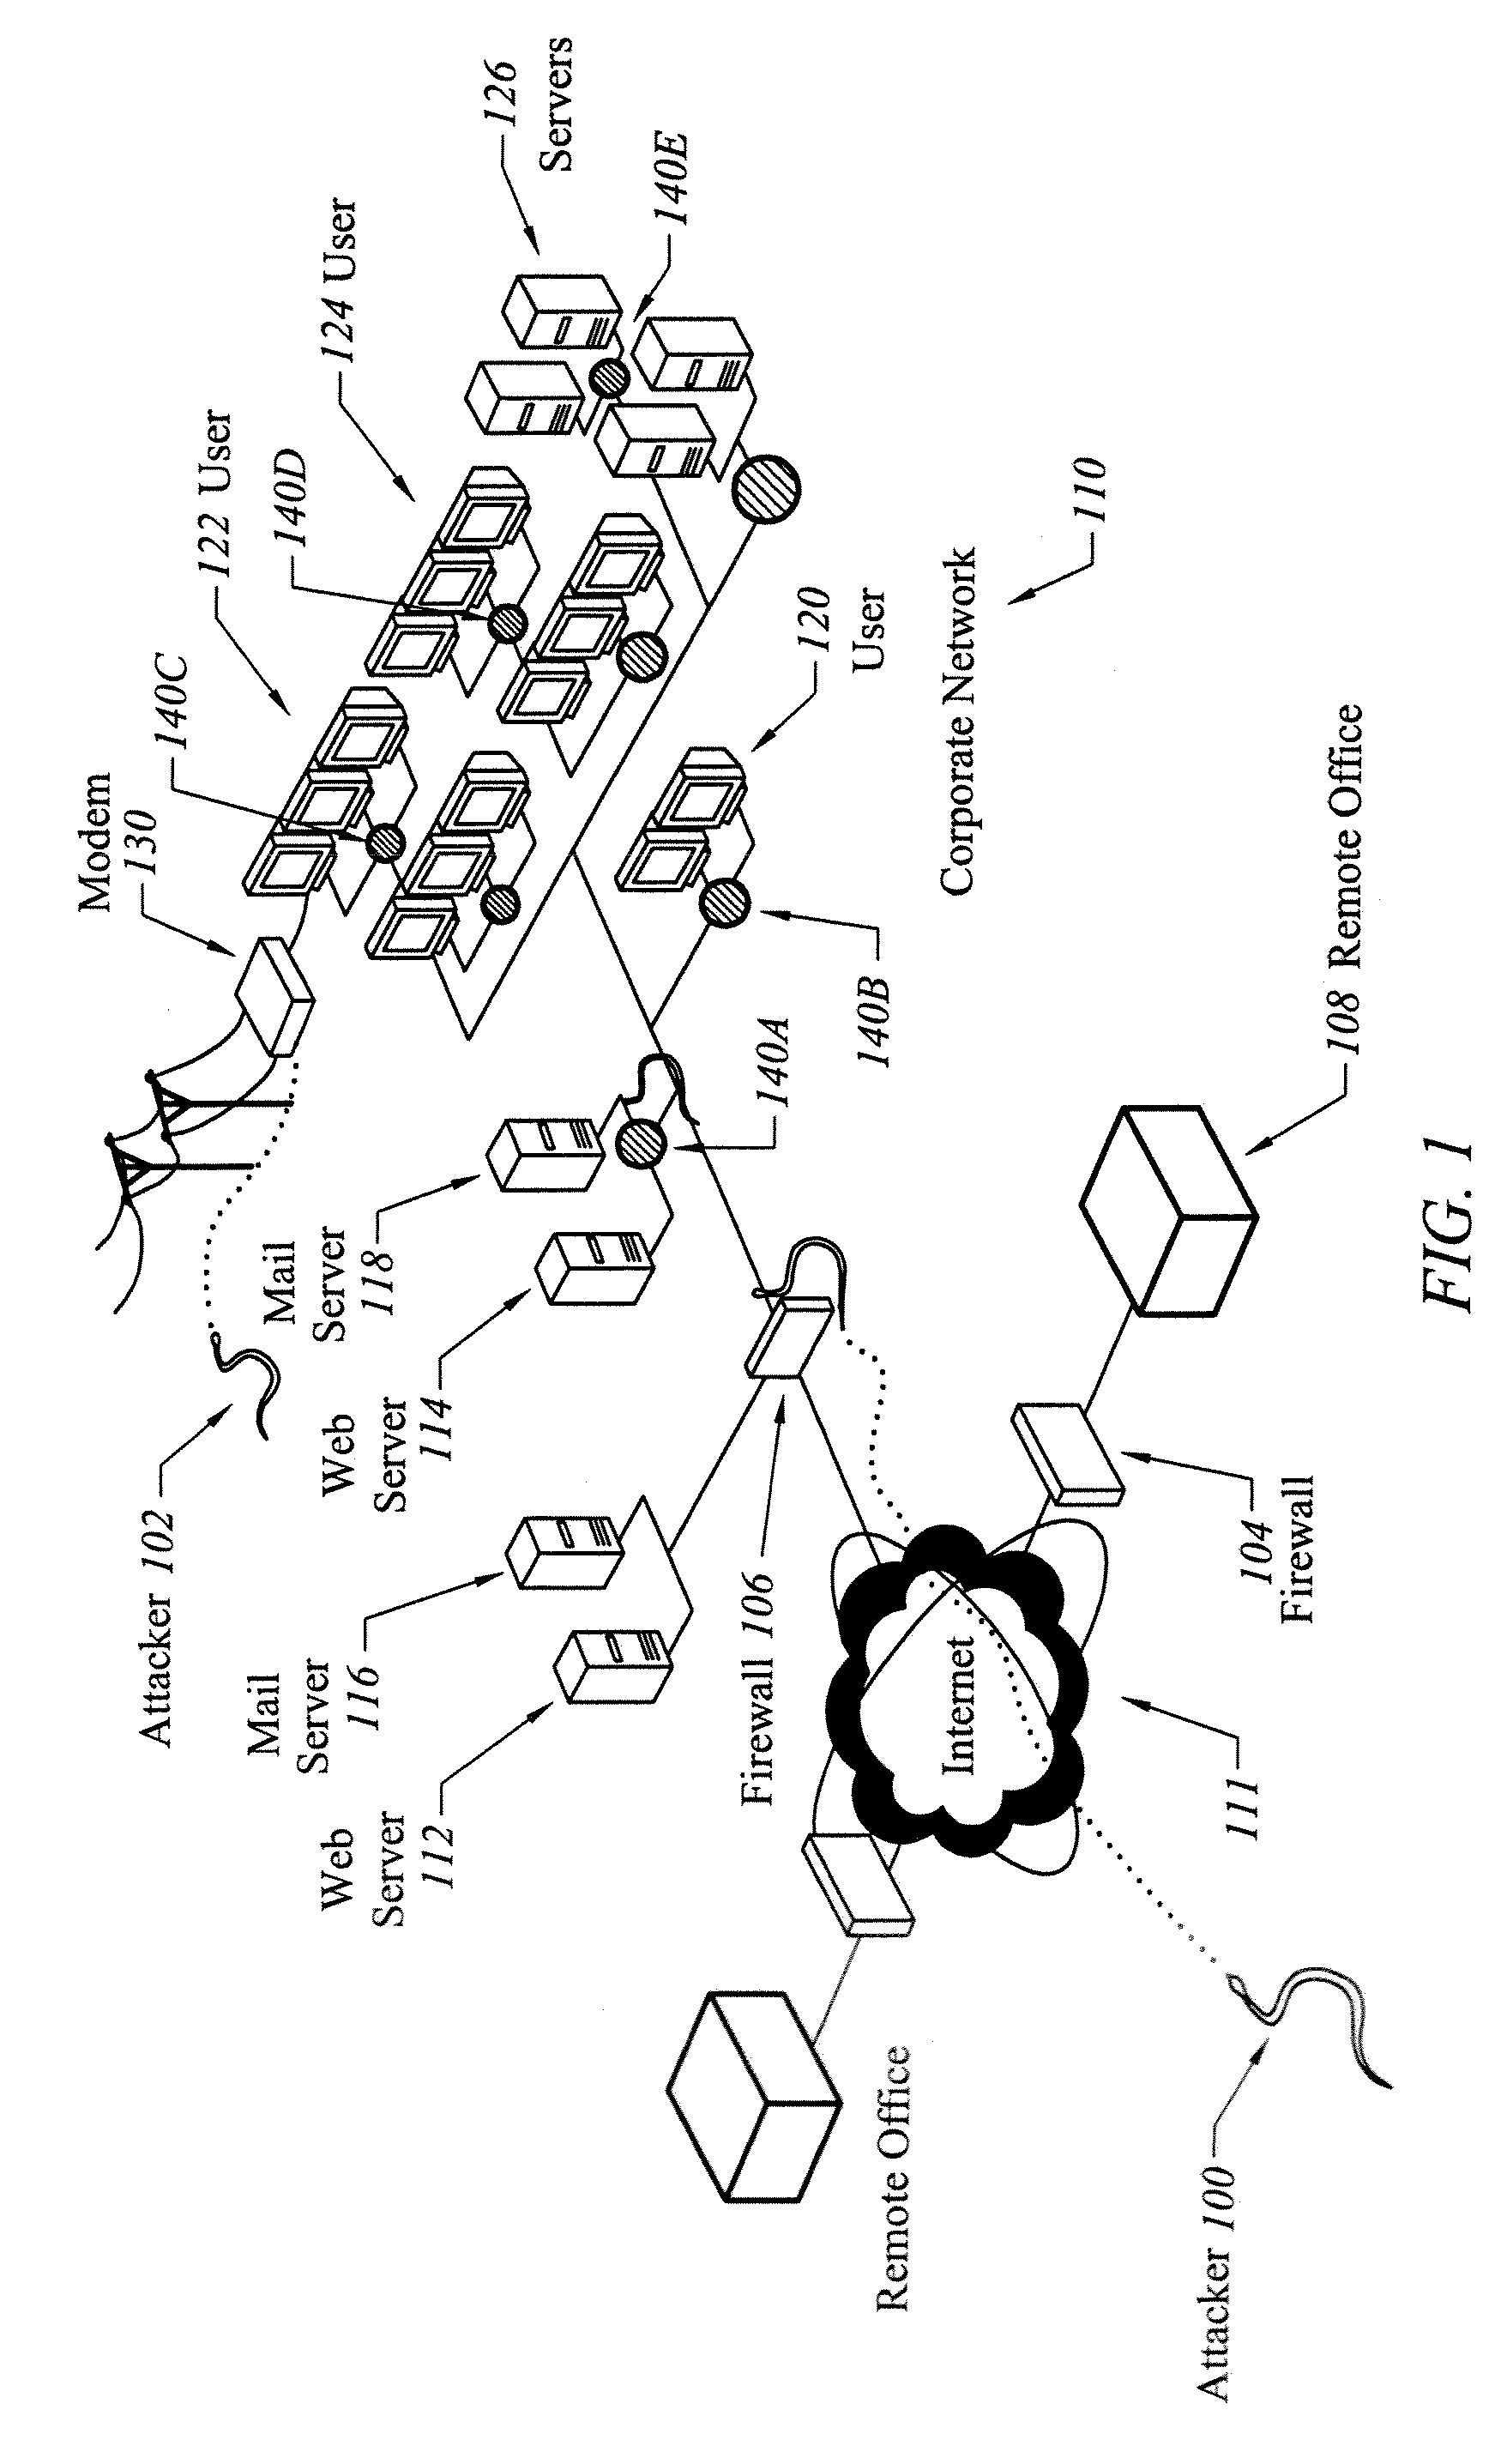 Apparatus and method for facilitating network security with granular traffic modifications